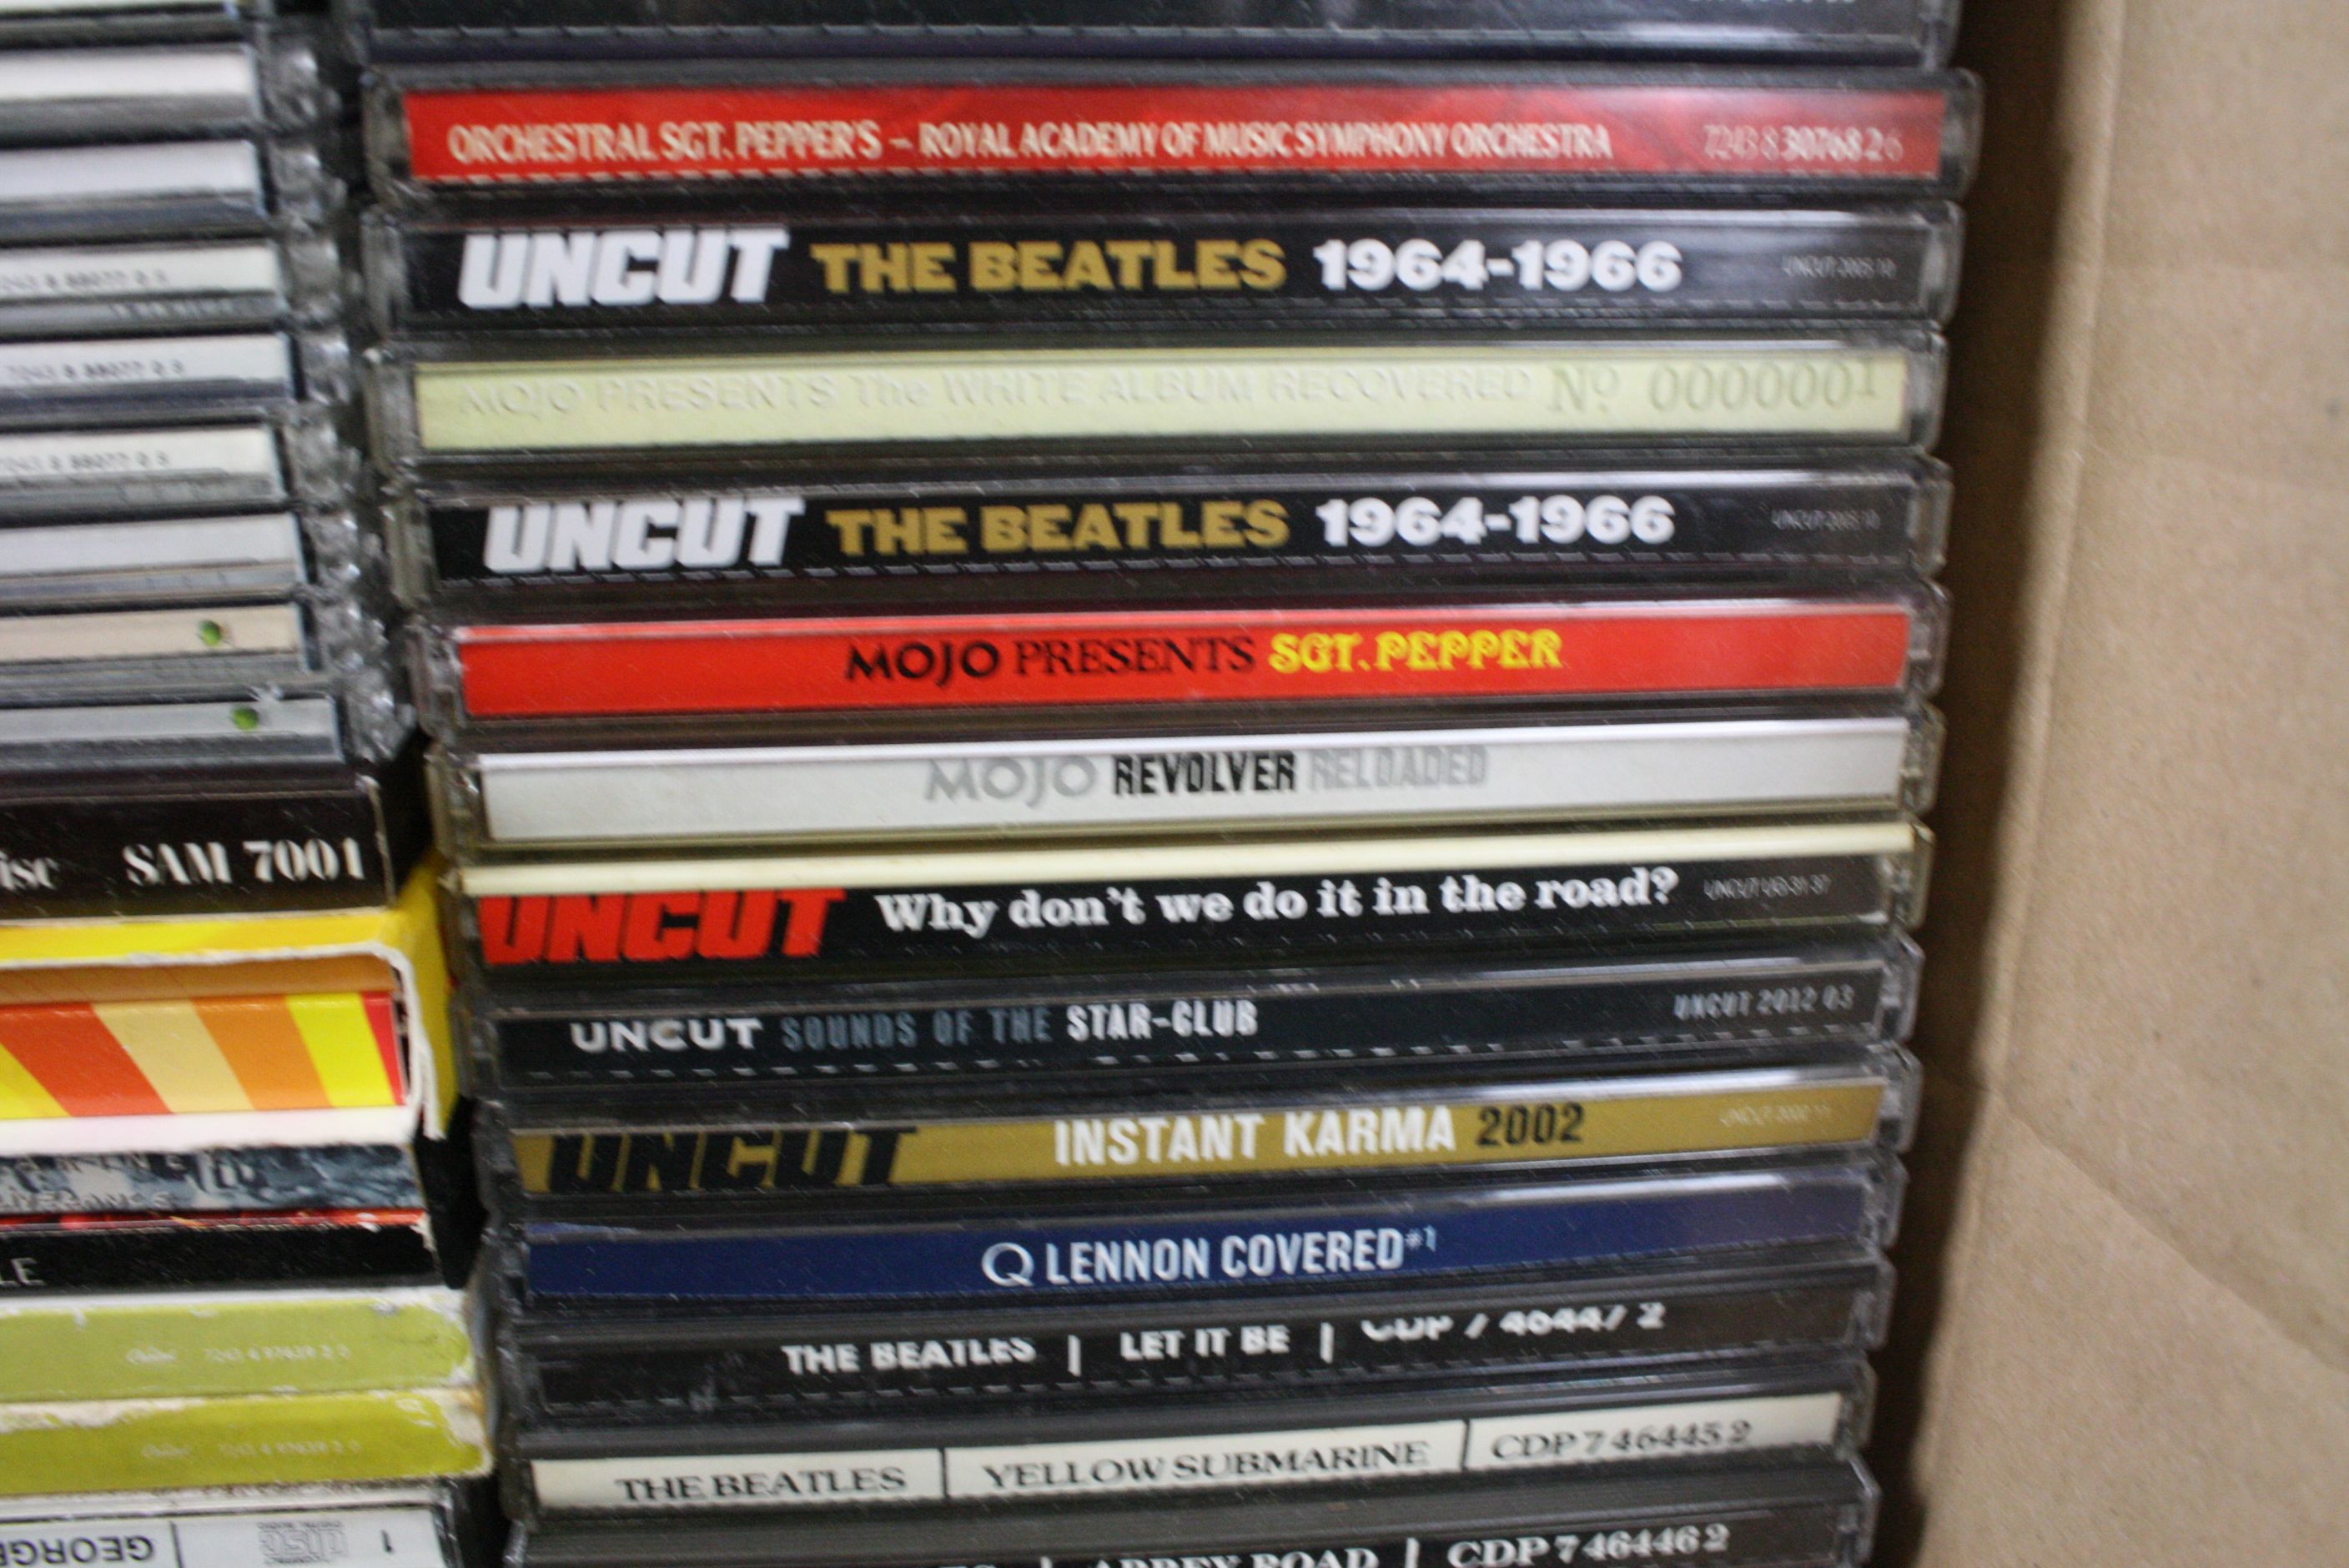 CDs - Over 150 Beatles and related CD's including imports, box sets, singles, giveaways, private - Image 16 of 18